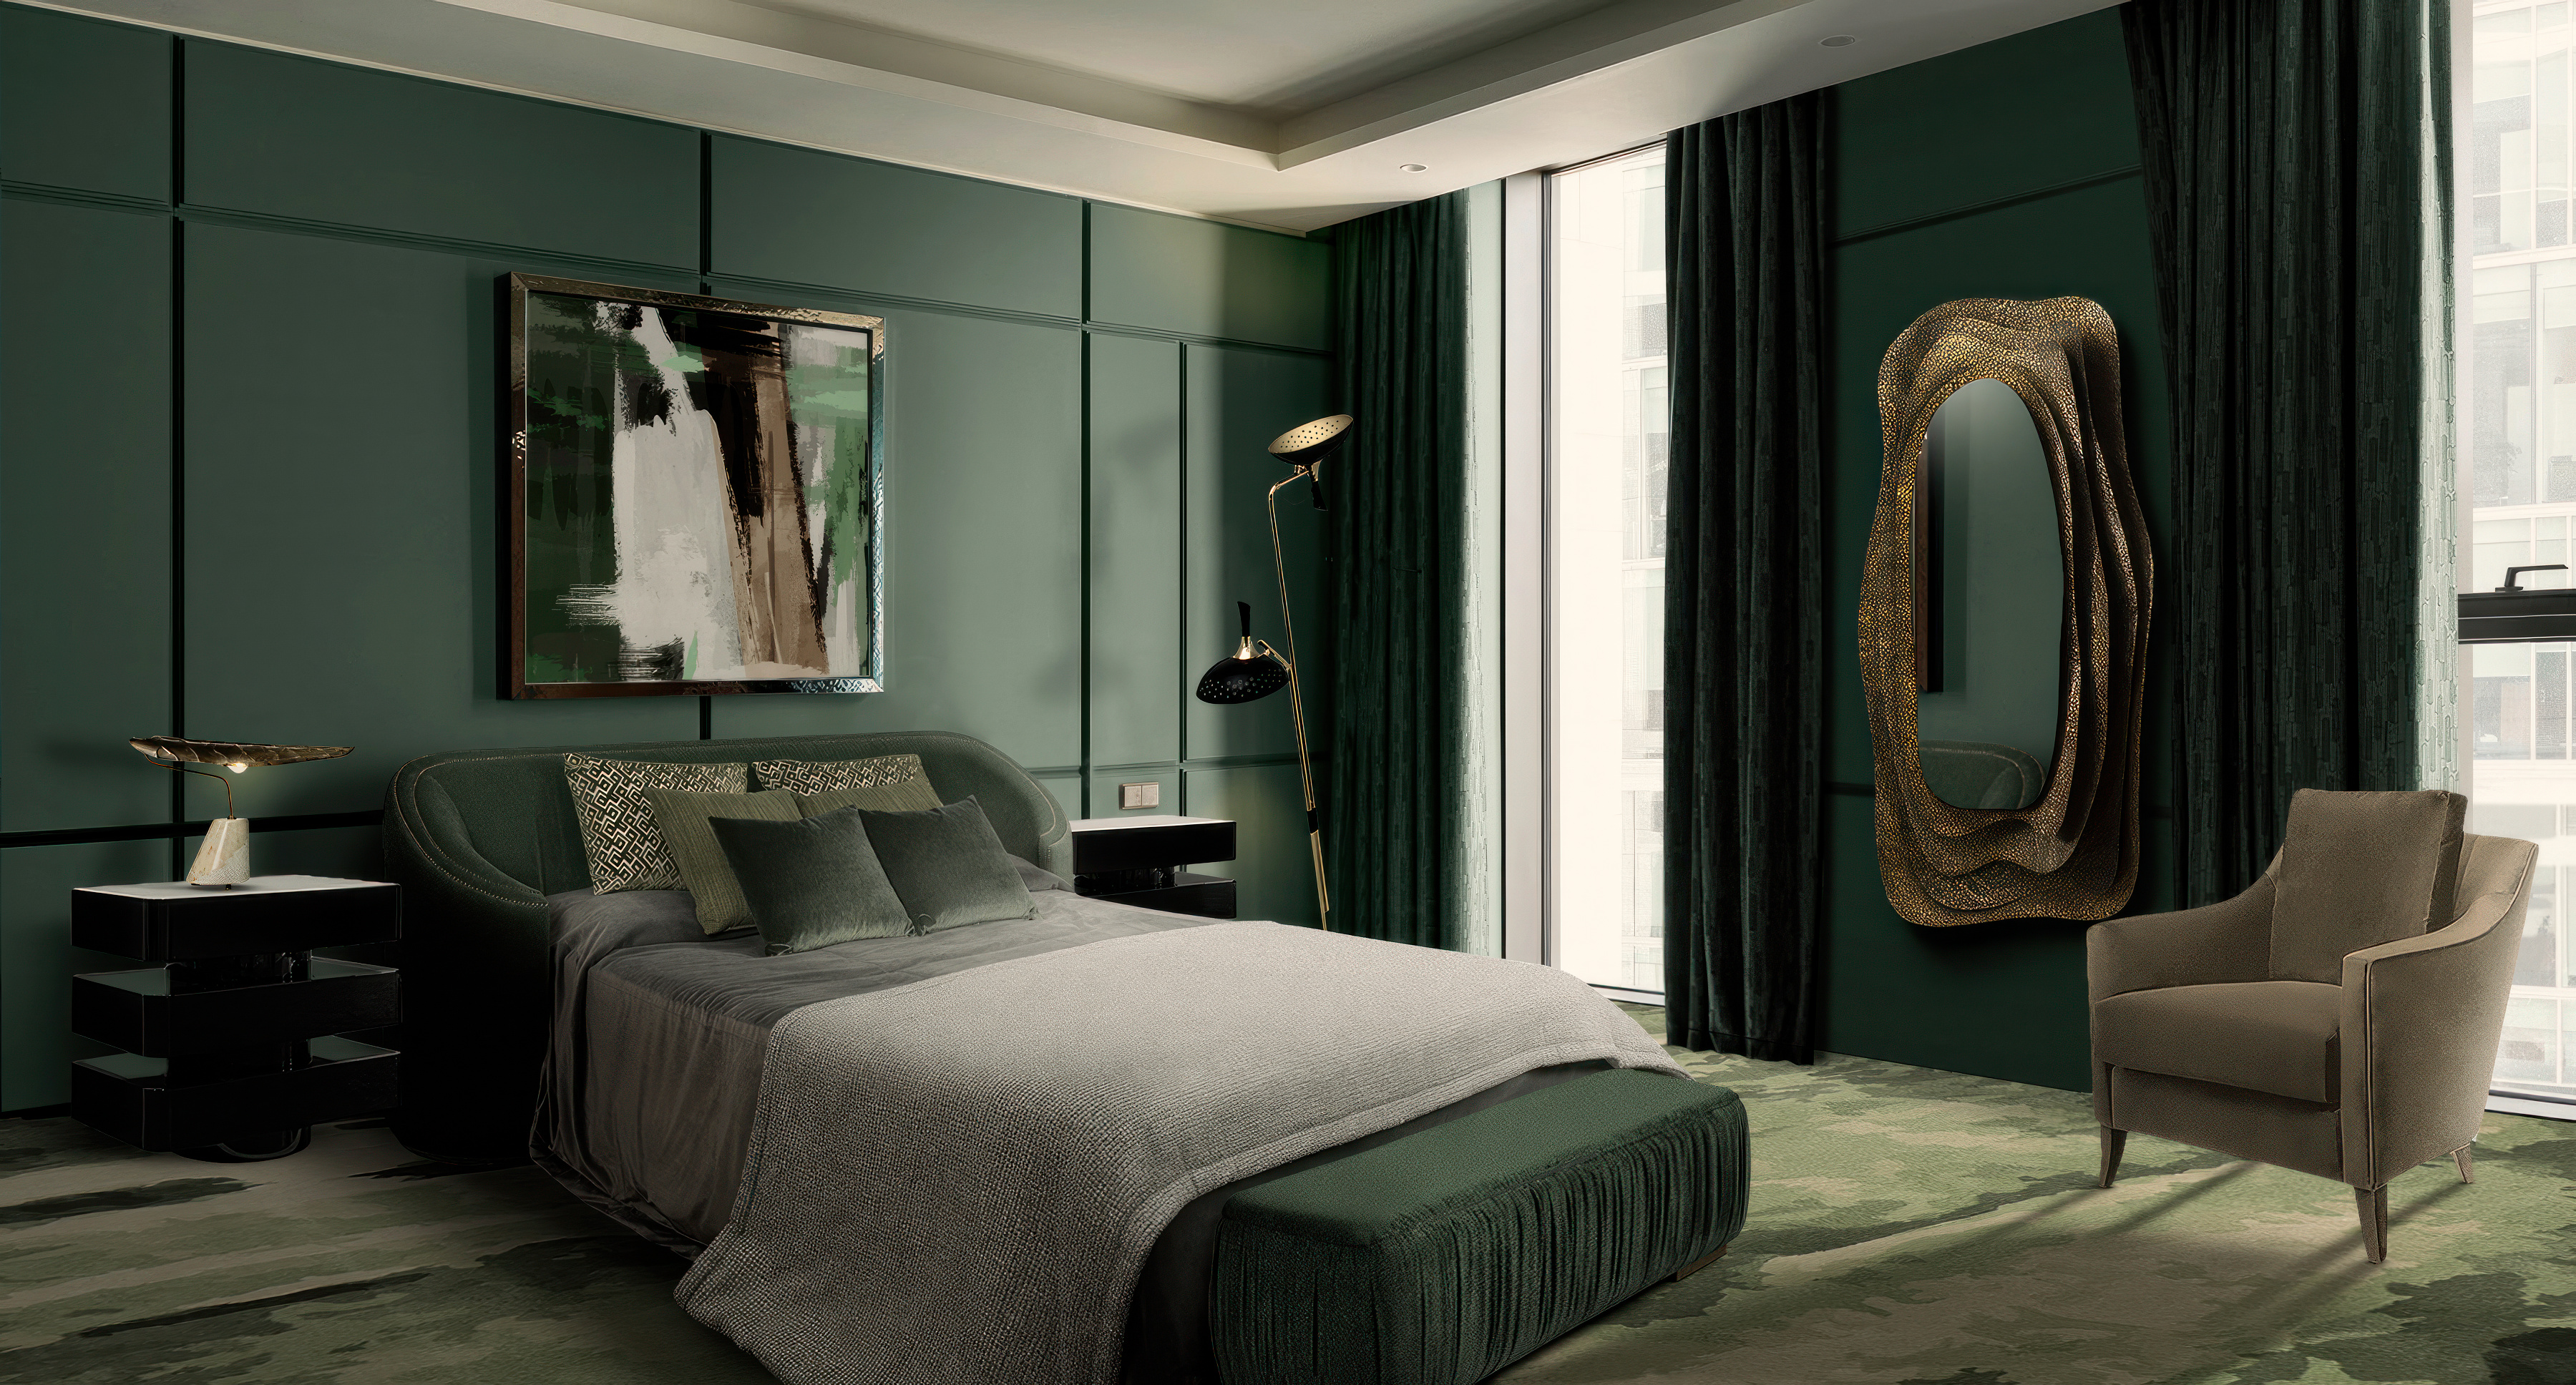 Modern Bedroom with Mirrored Walls: A Greenish Sophisticated and Luxurious Room - Home'Society